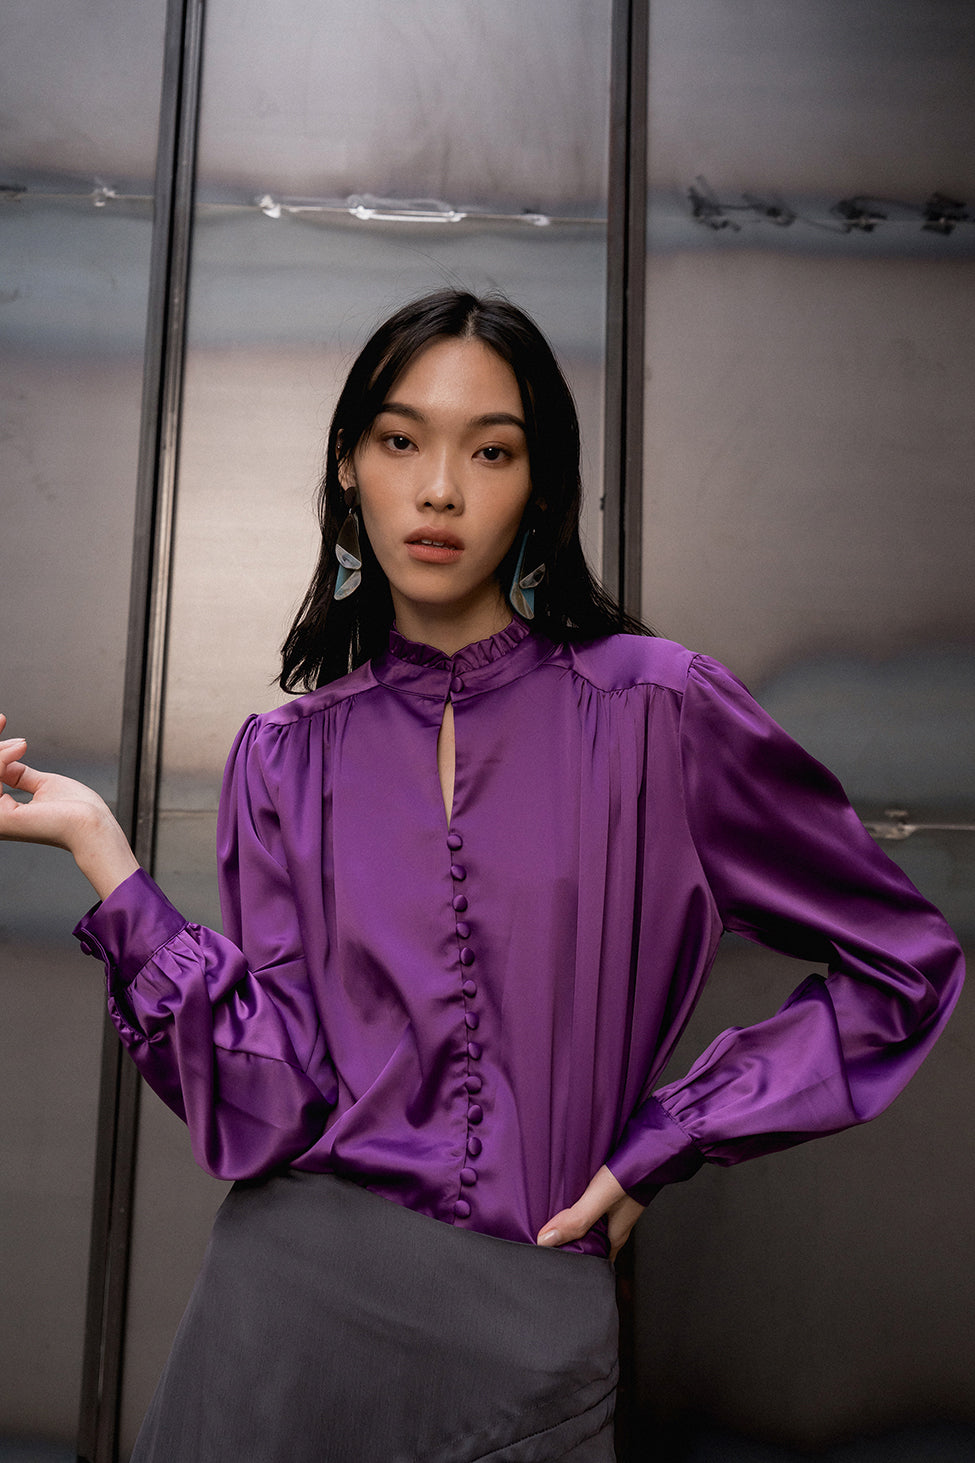 The Mariella silky top featuring band collar with ruched ruffles detailing, long sleeves with single-button cuff. Full-button placket. Relaxed fit.